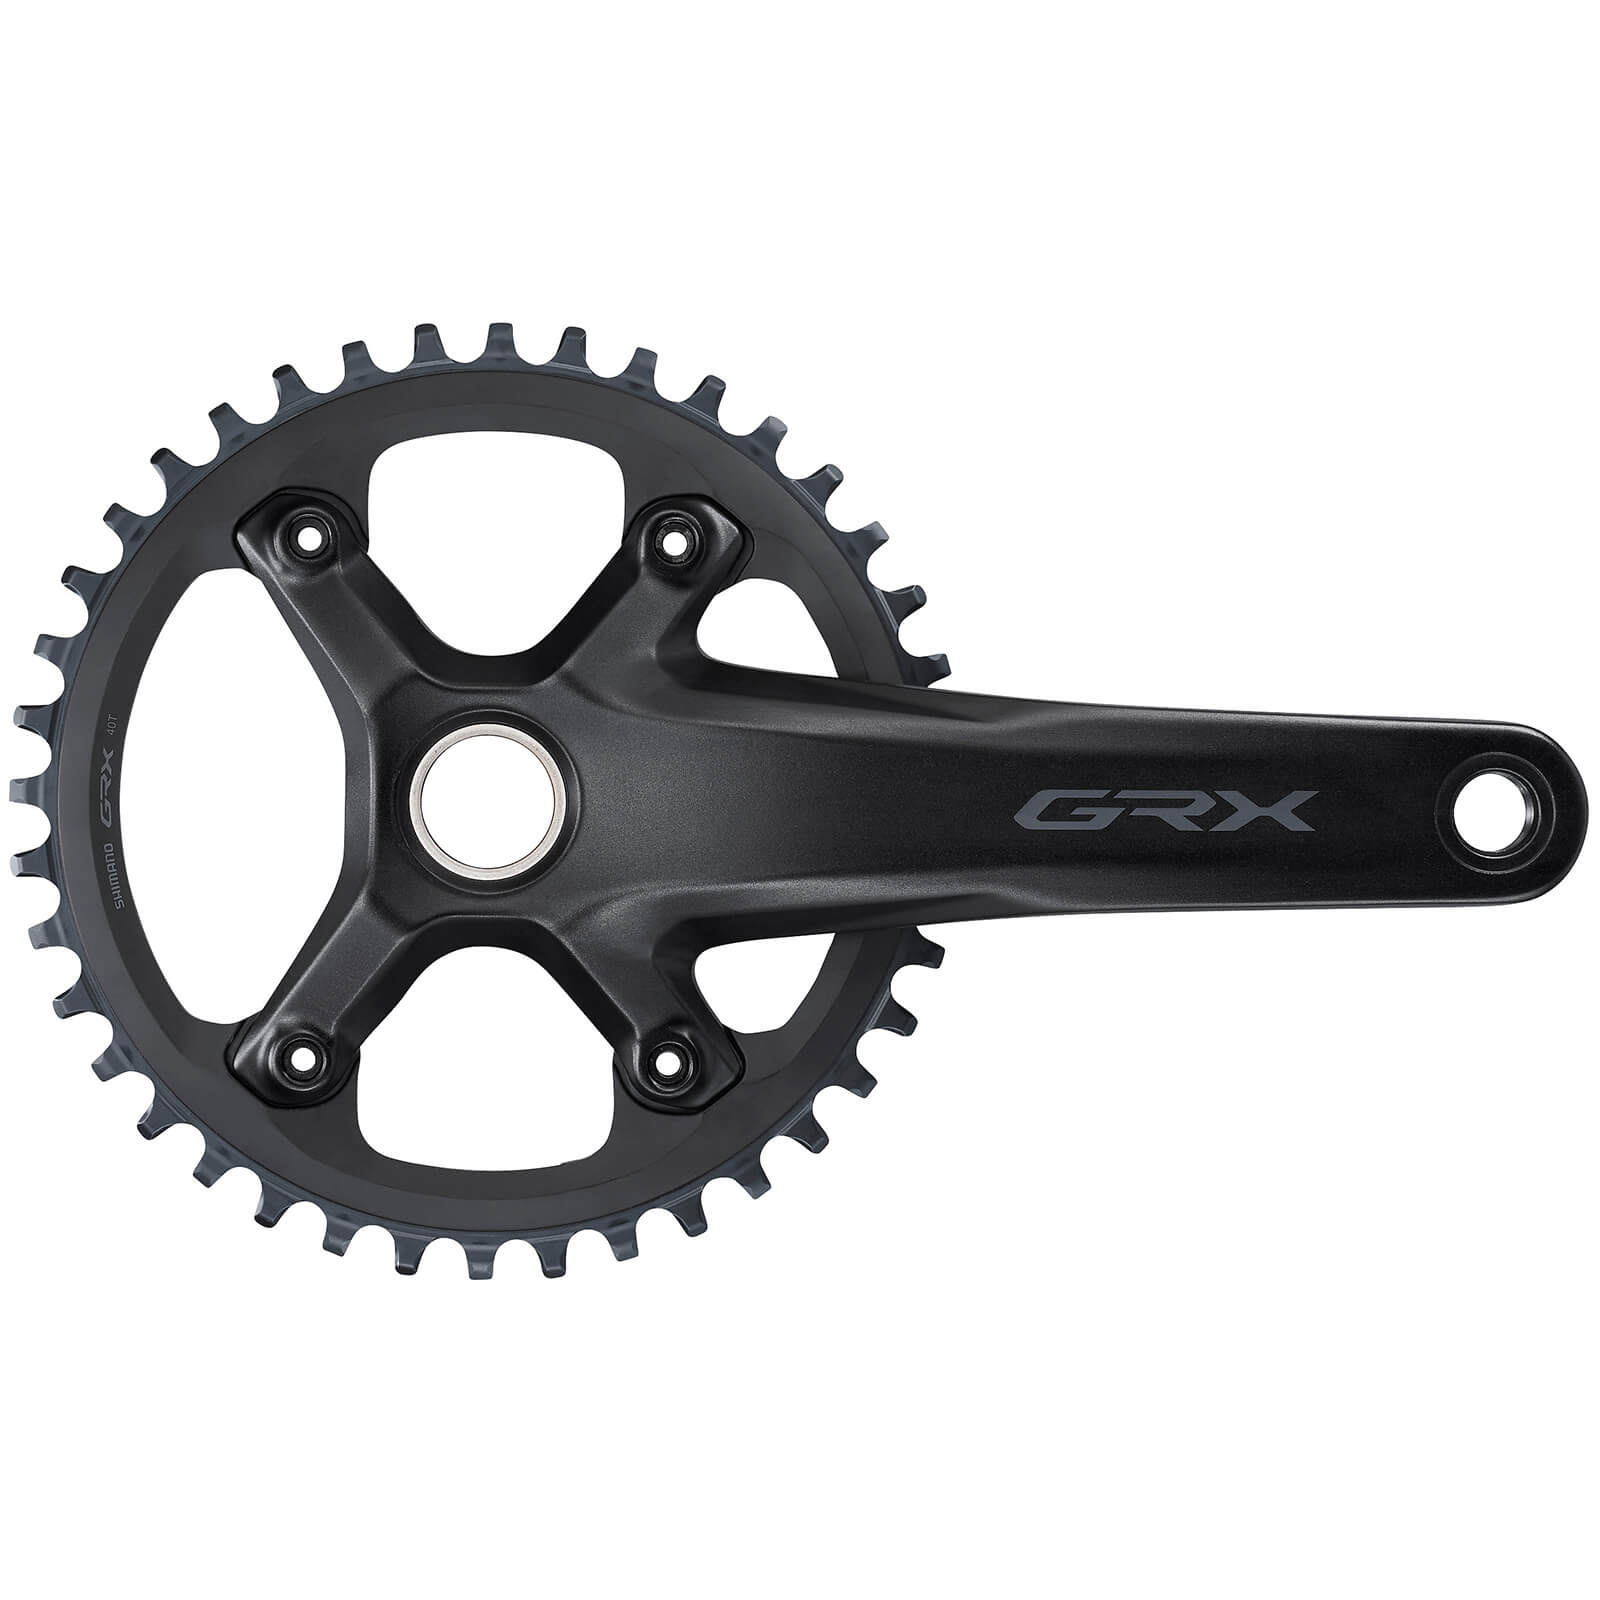 Shimano GRX RX600 Single 11 Speed Chainset - 40T - 172.5mm